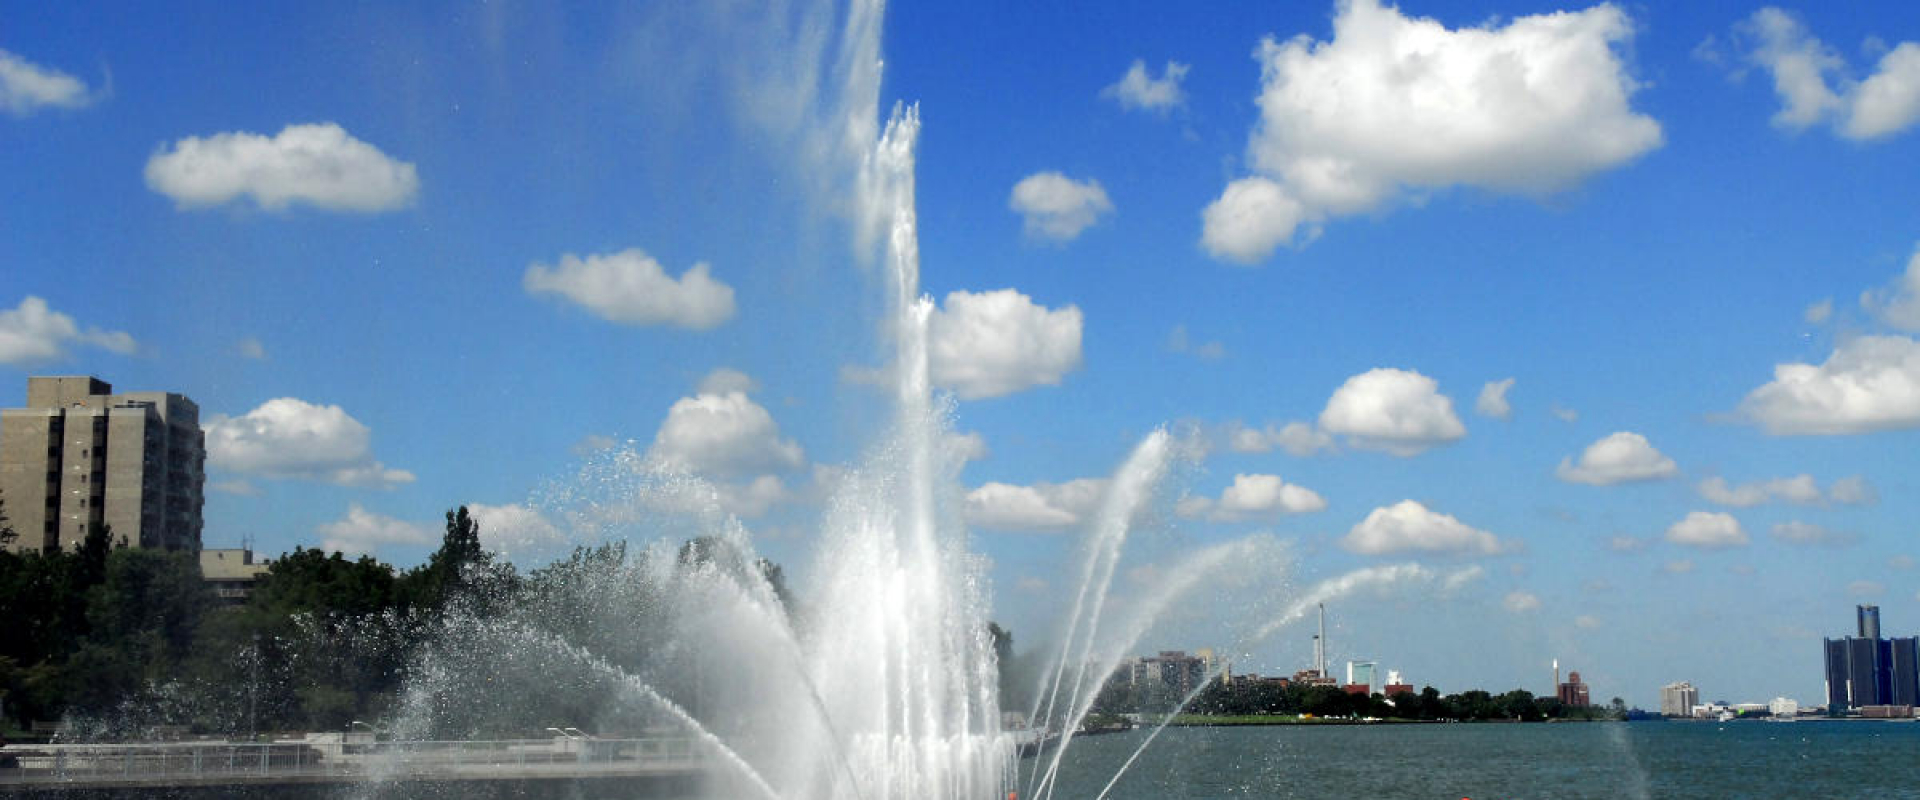 The Peace Fountain floats on the Detroit River, propeling water up to 70 feet in the air.